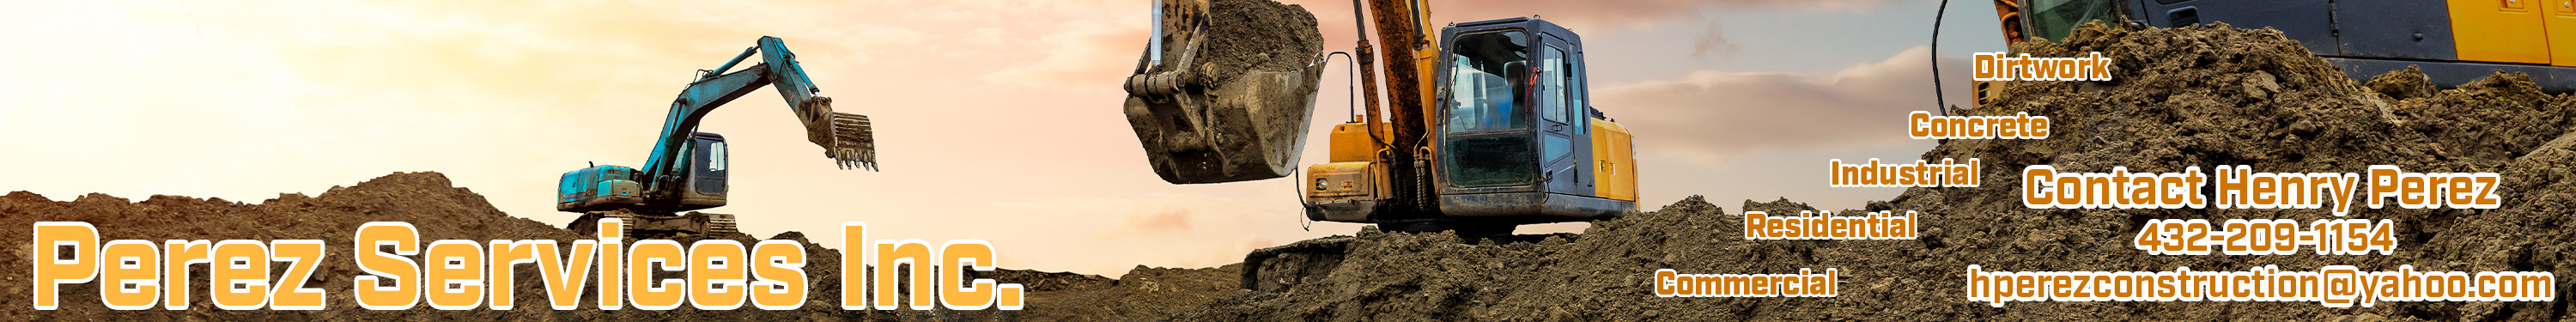 Perez Services Inc advertisement. Three yellow bulldozers digging in dirt under a sunset. Contact Henry Perez 432-209-1154